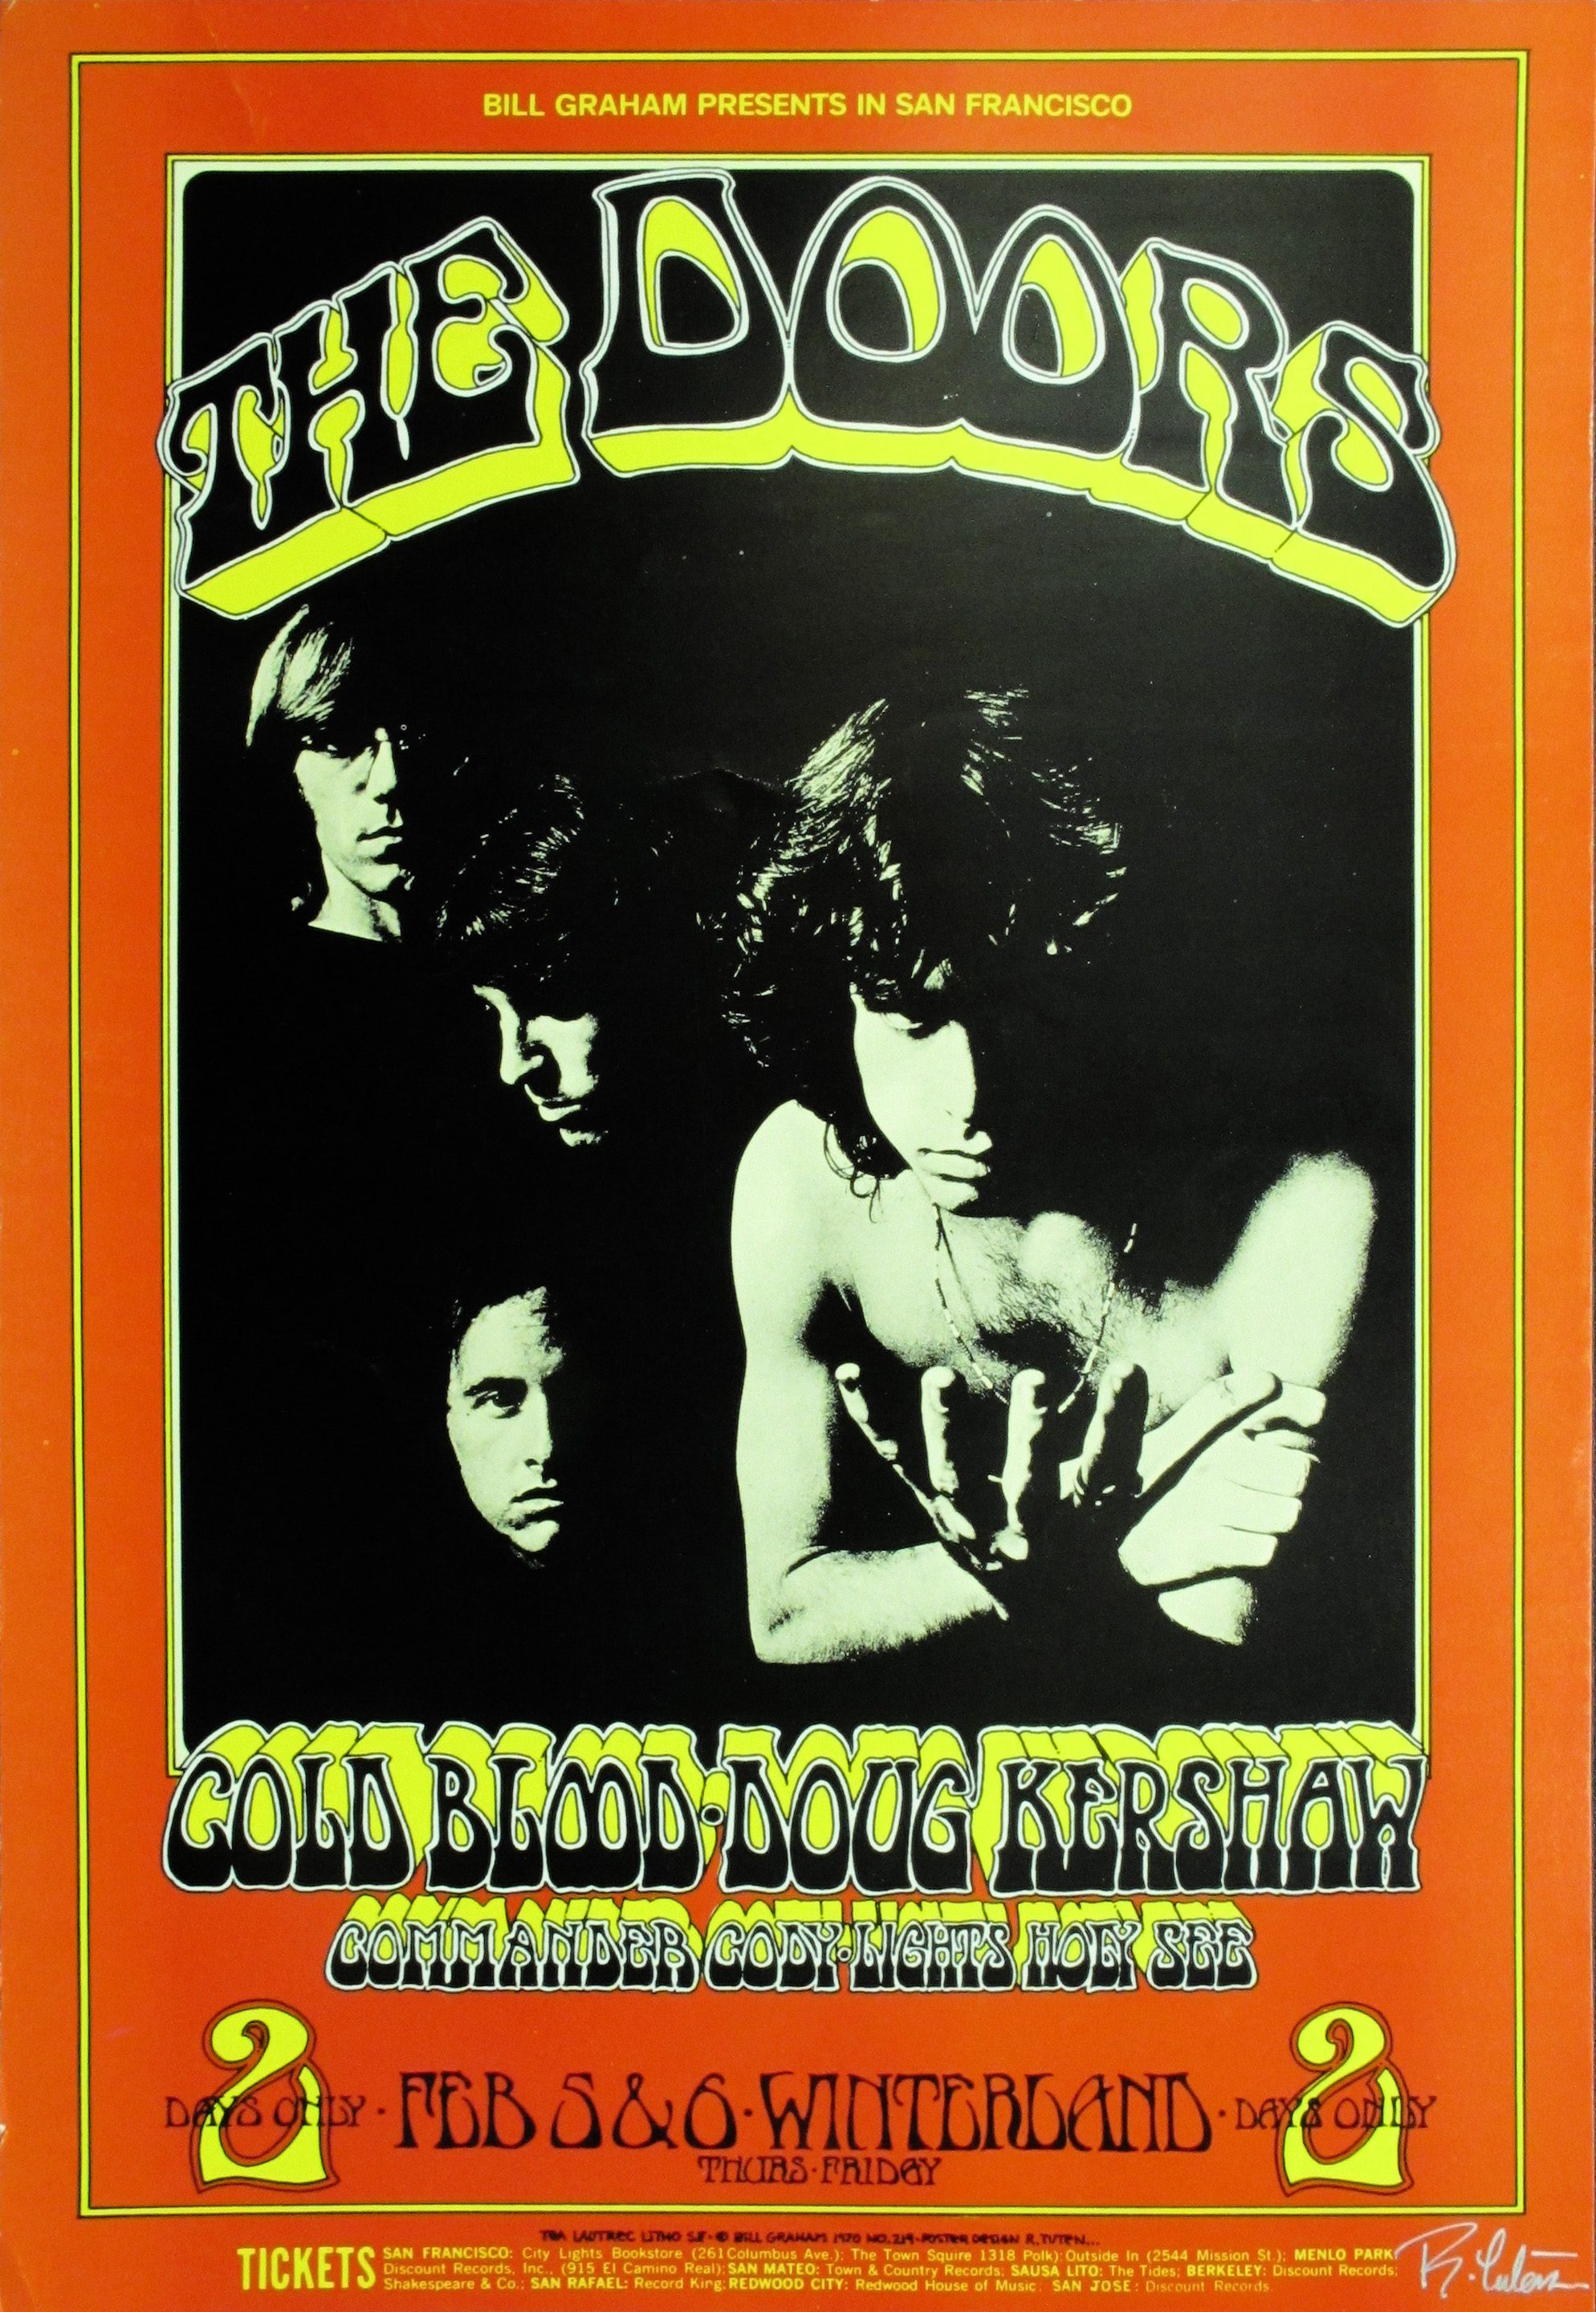 productimage-picture-the-doors-cold-blood-original-concert-poster-3788.jpg